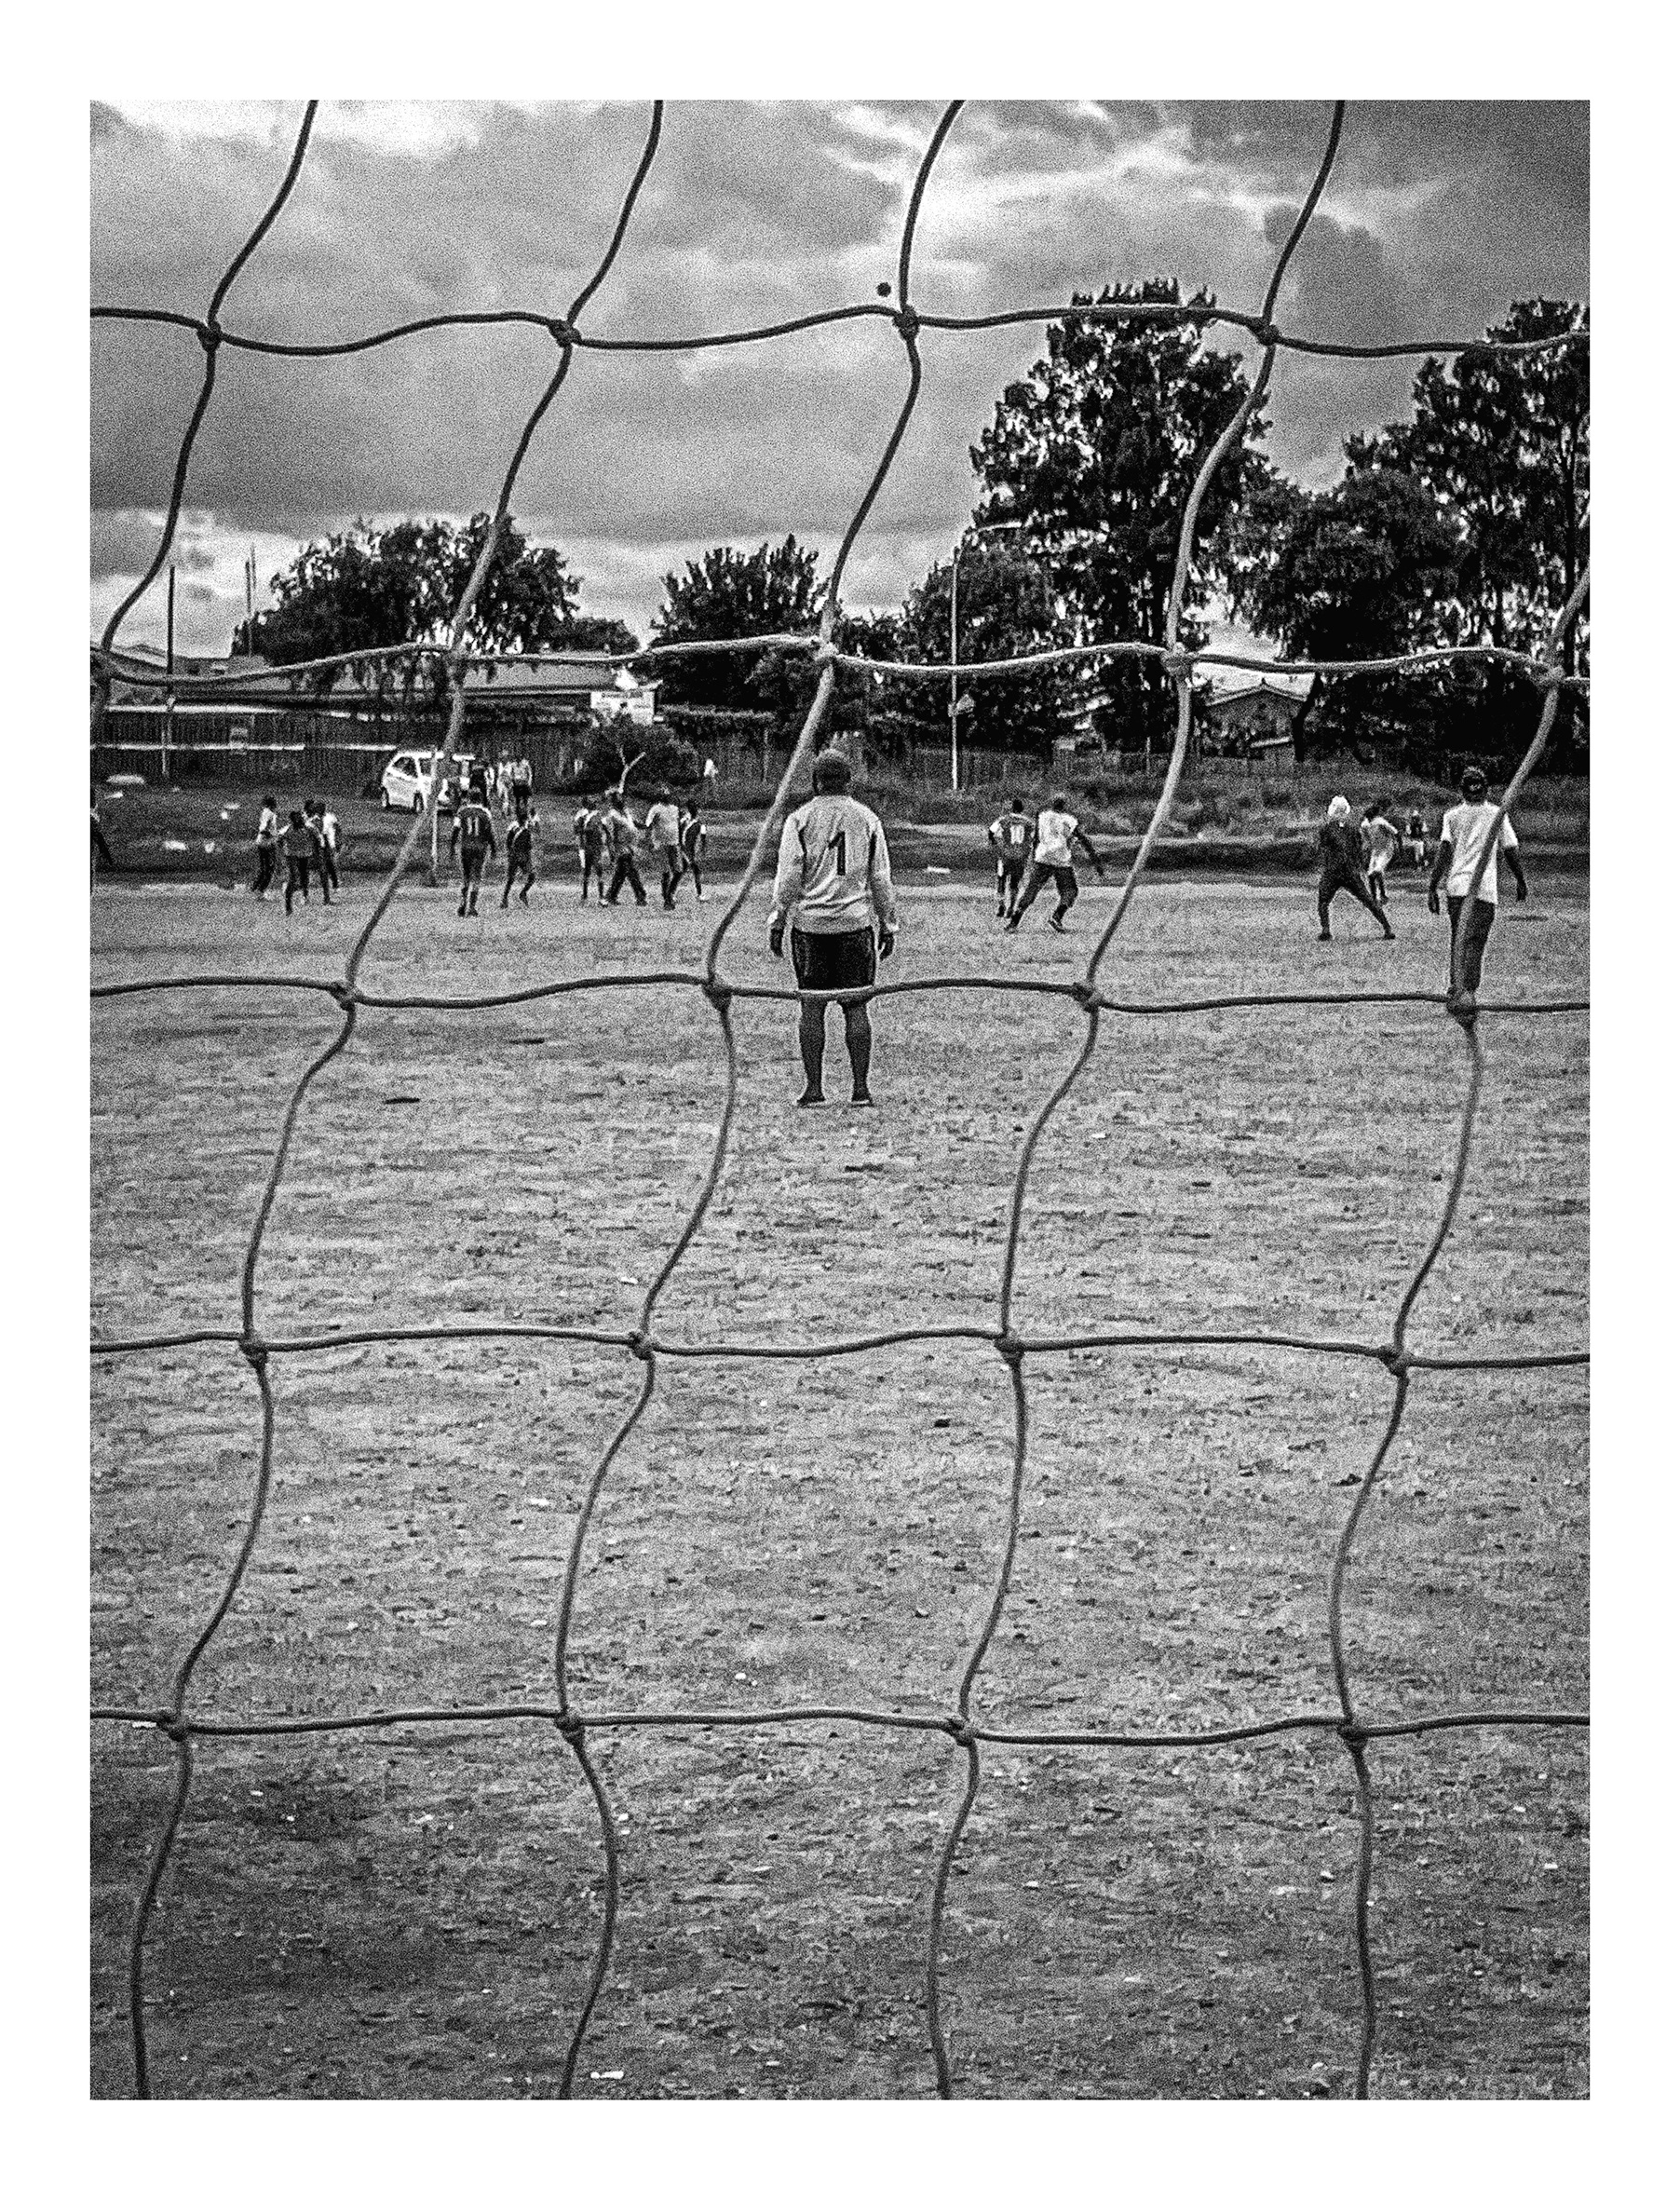 Andile Komasi's monochrome photograph 'Soccer Indaba' depicts a soccer player through a net.
